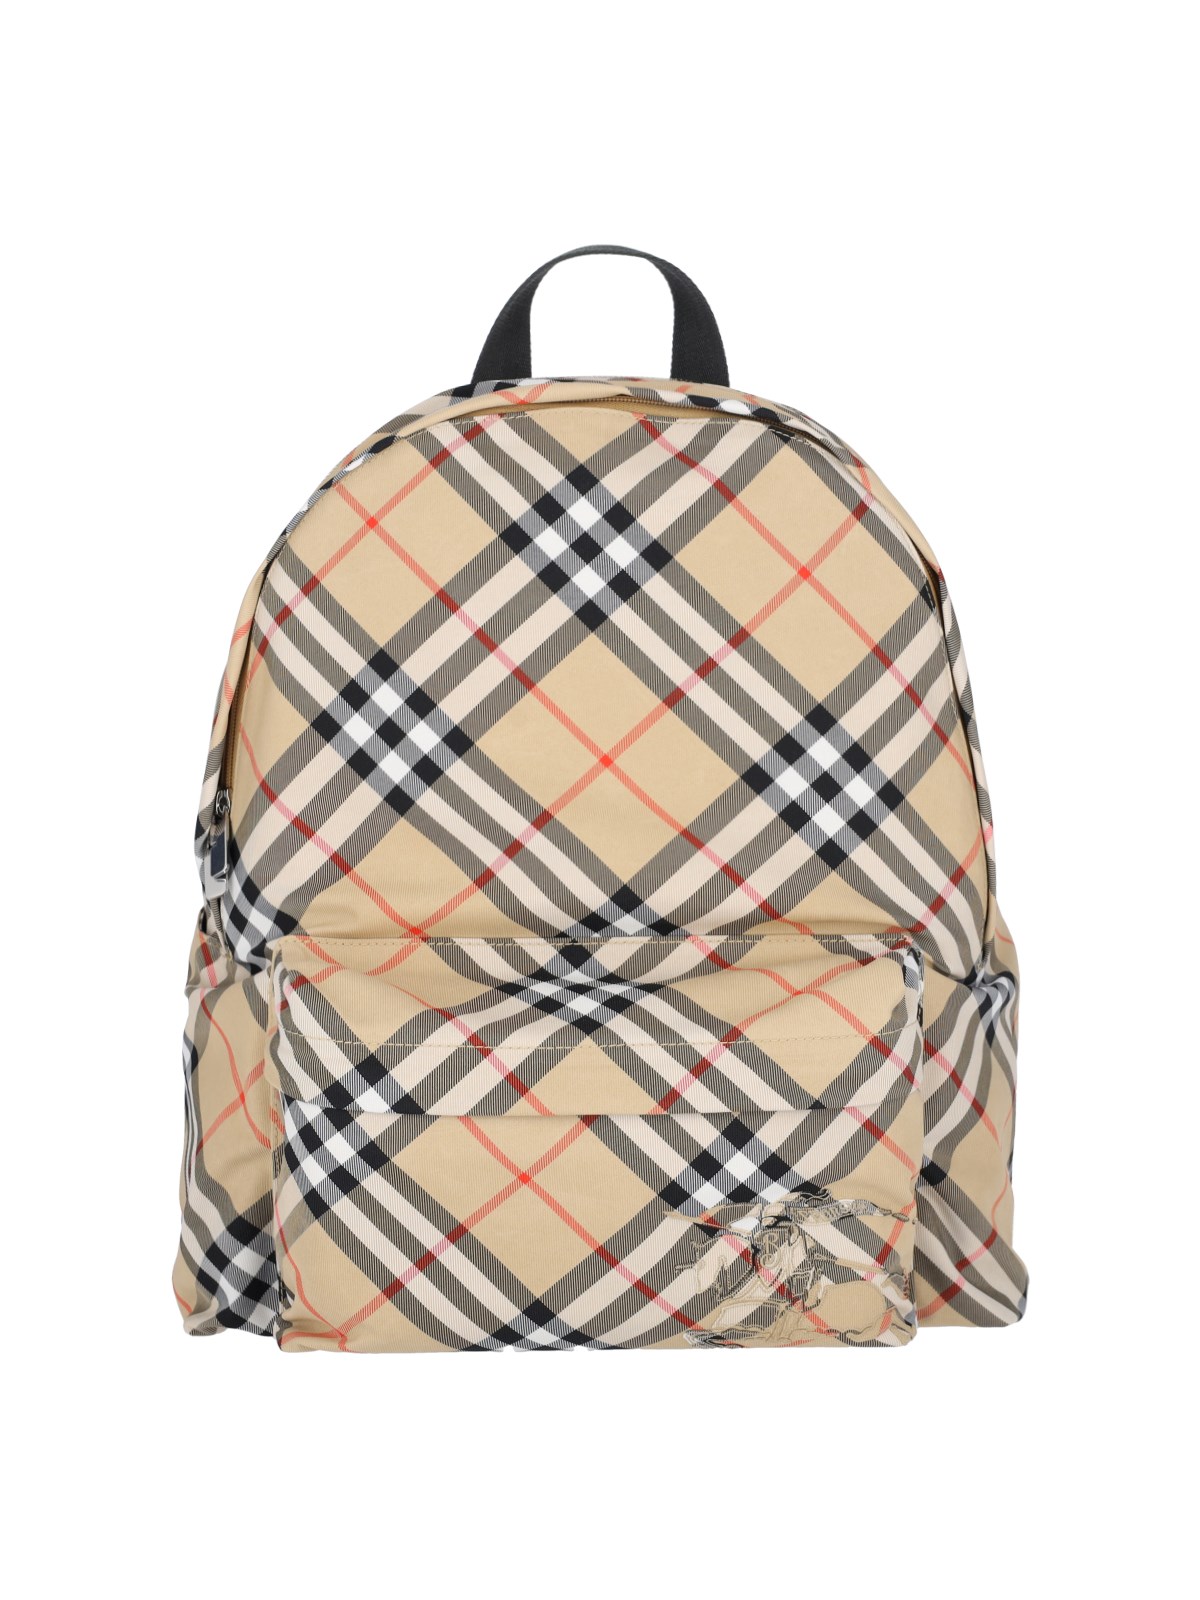 Burberry 'check' Backpack In Pattern